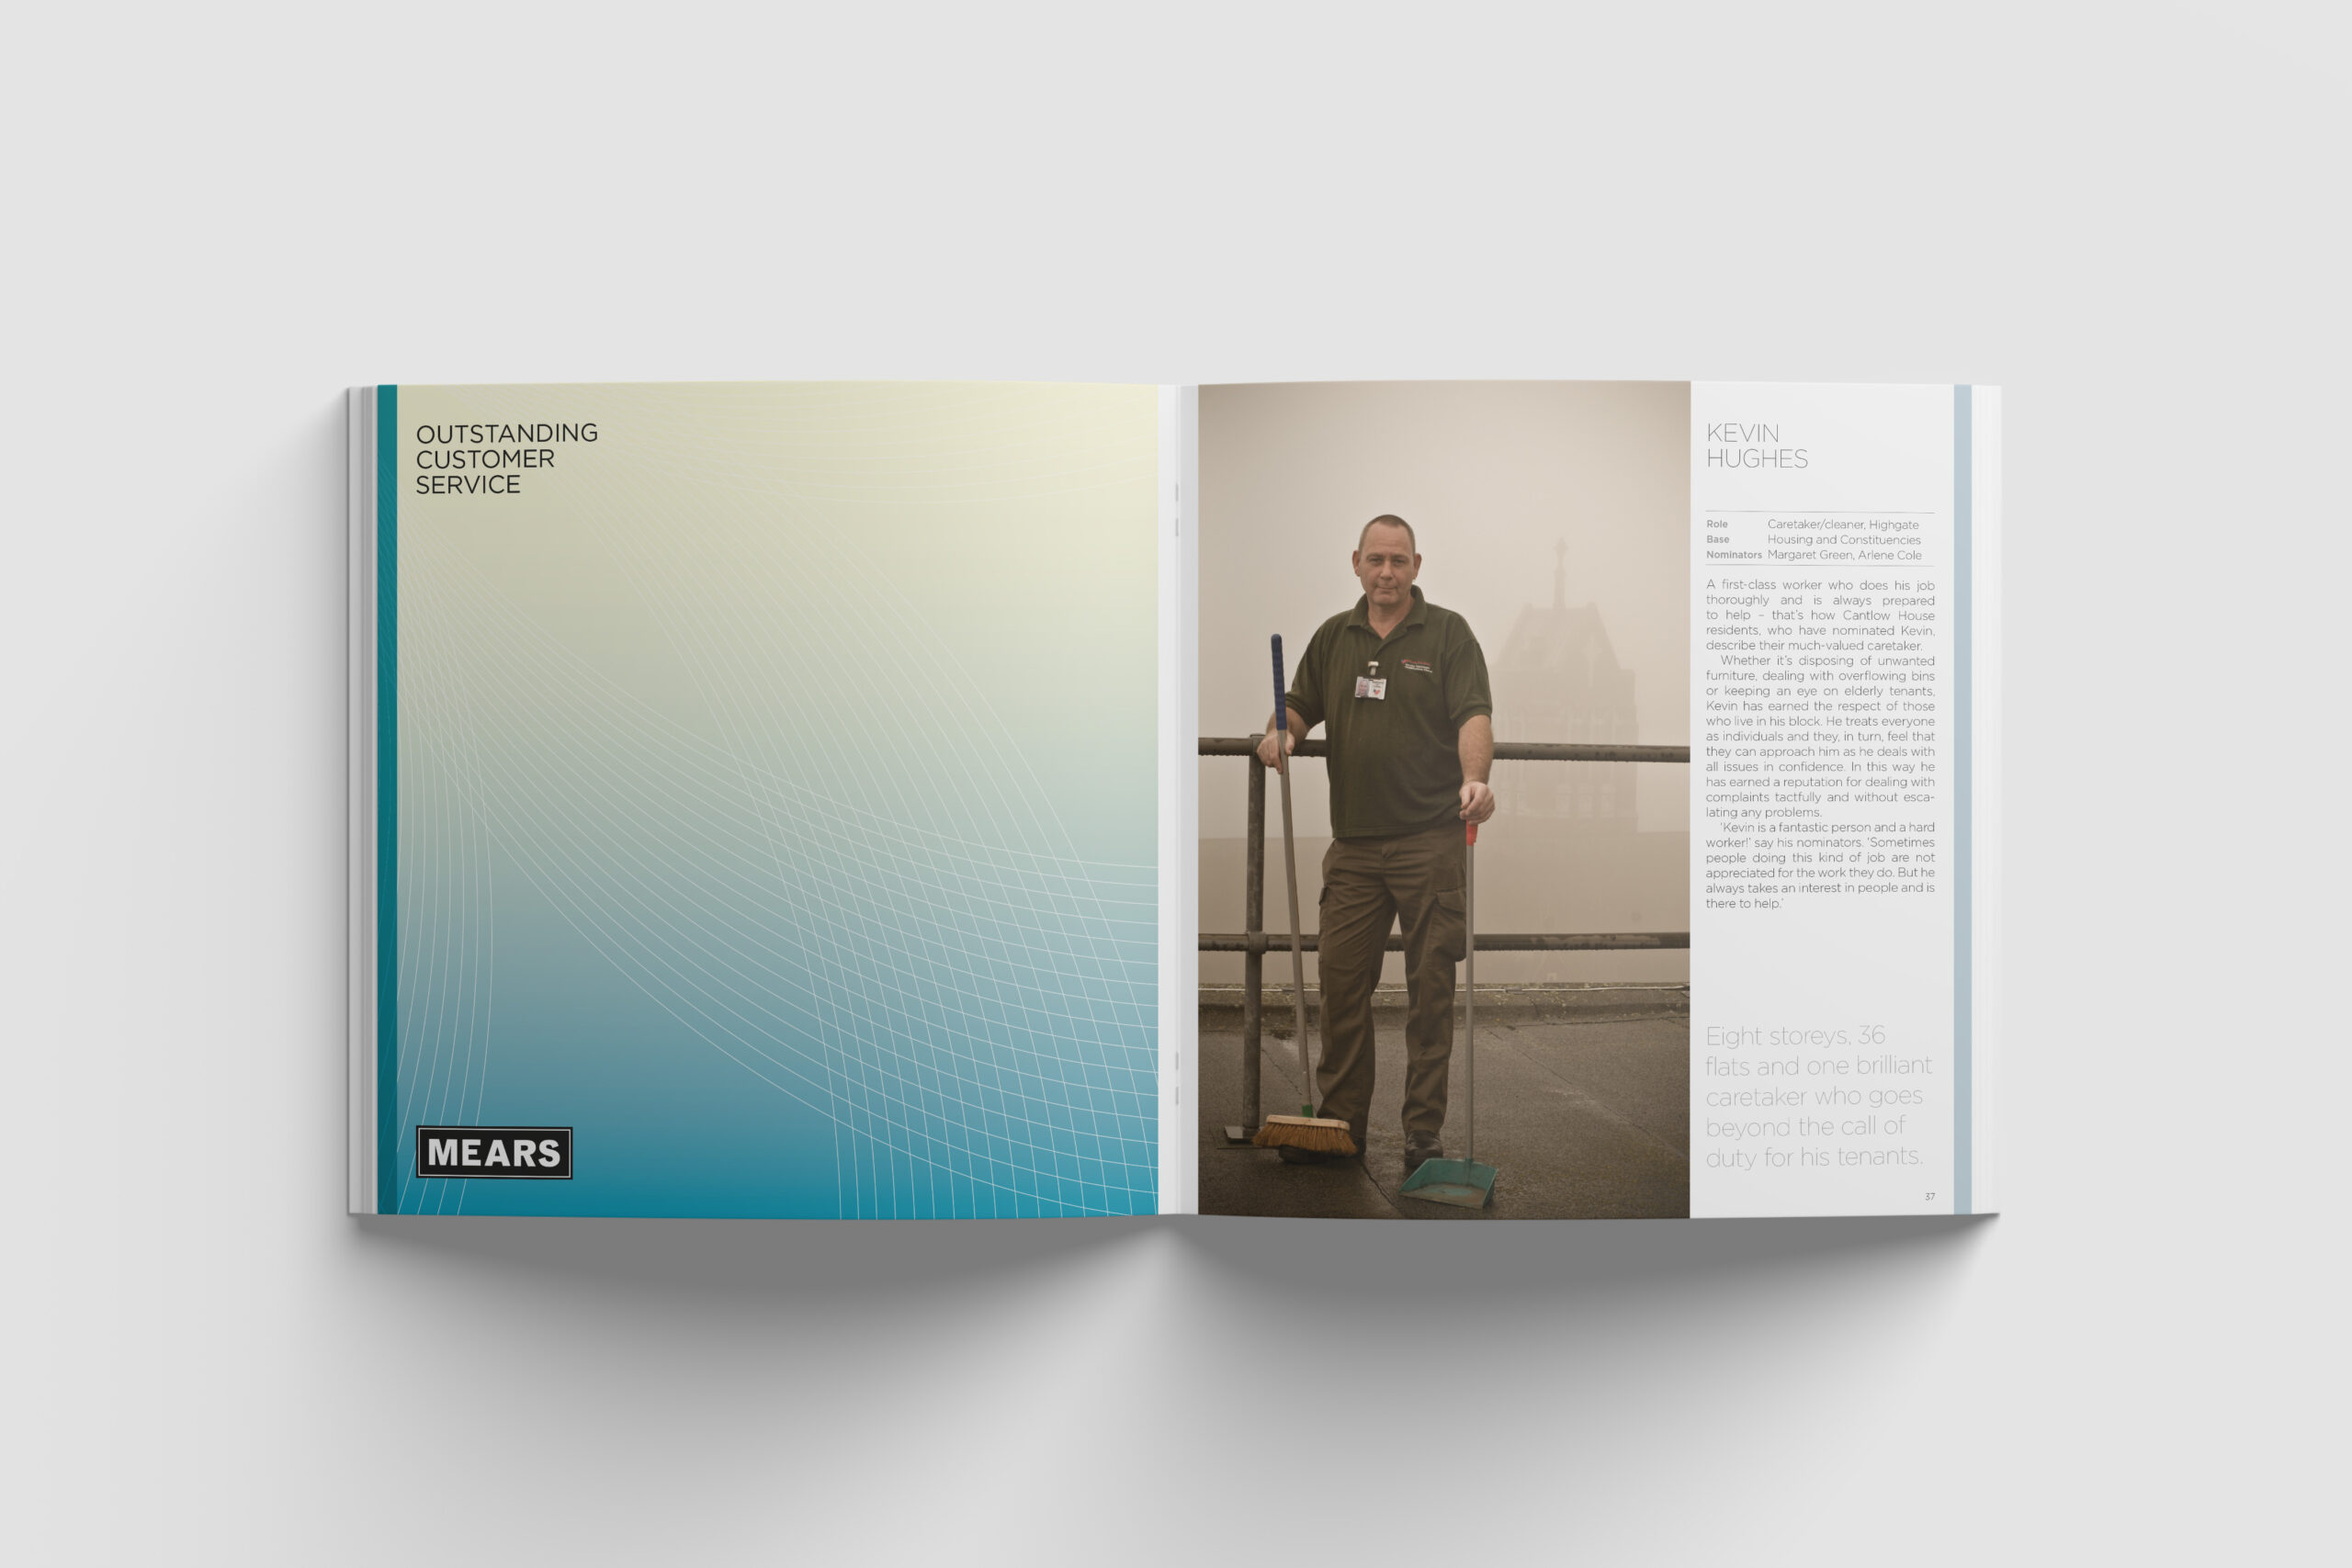 Double-page spread from the 'Outstanding Customer Service' category in the Chamberlain Awards 2008 brochure. The category name is on the left hand side of the spread against a light blue background. The left-hand side contains an image and interview with finalist Kevin Hughes